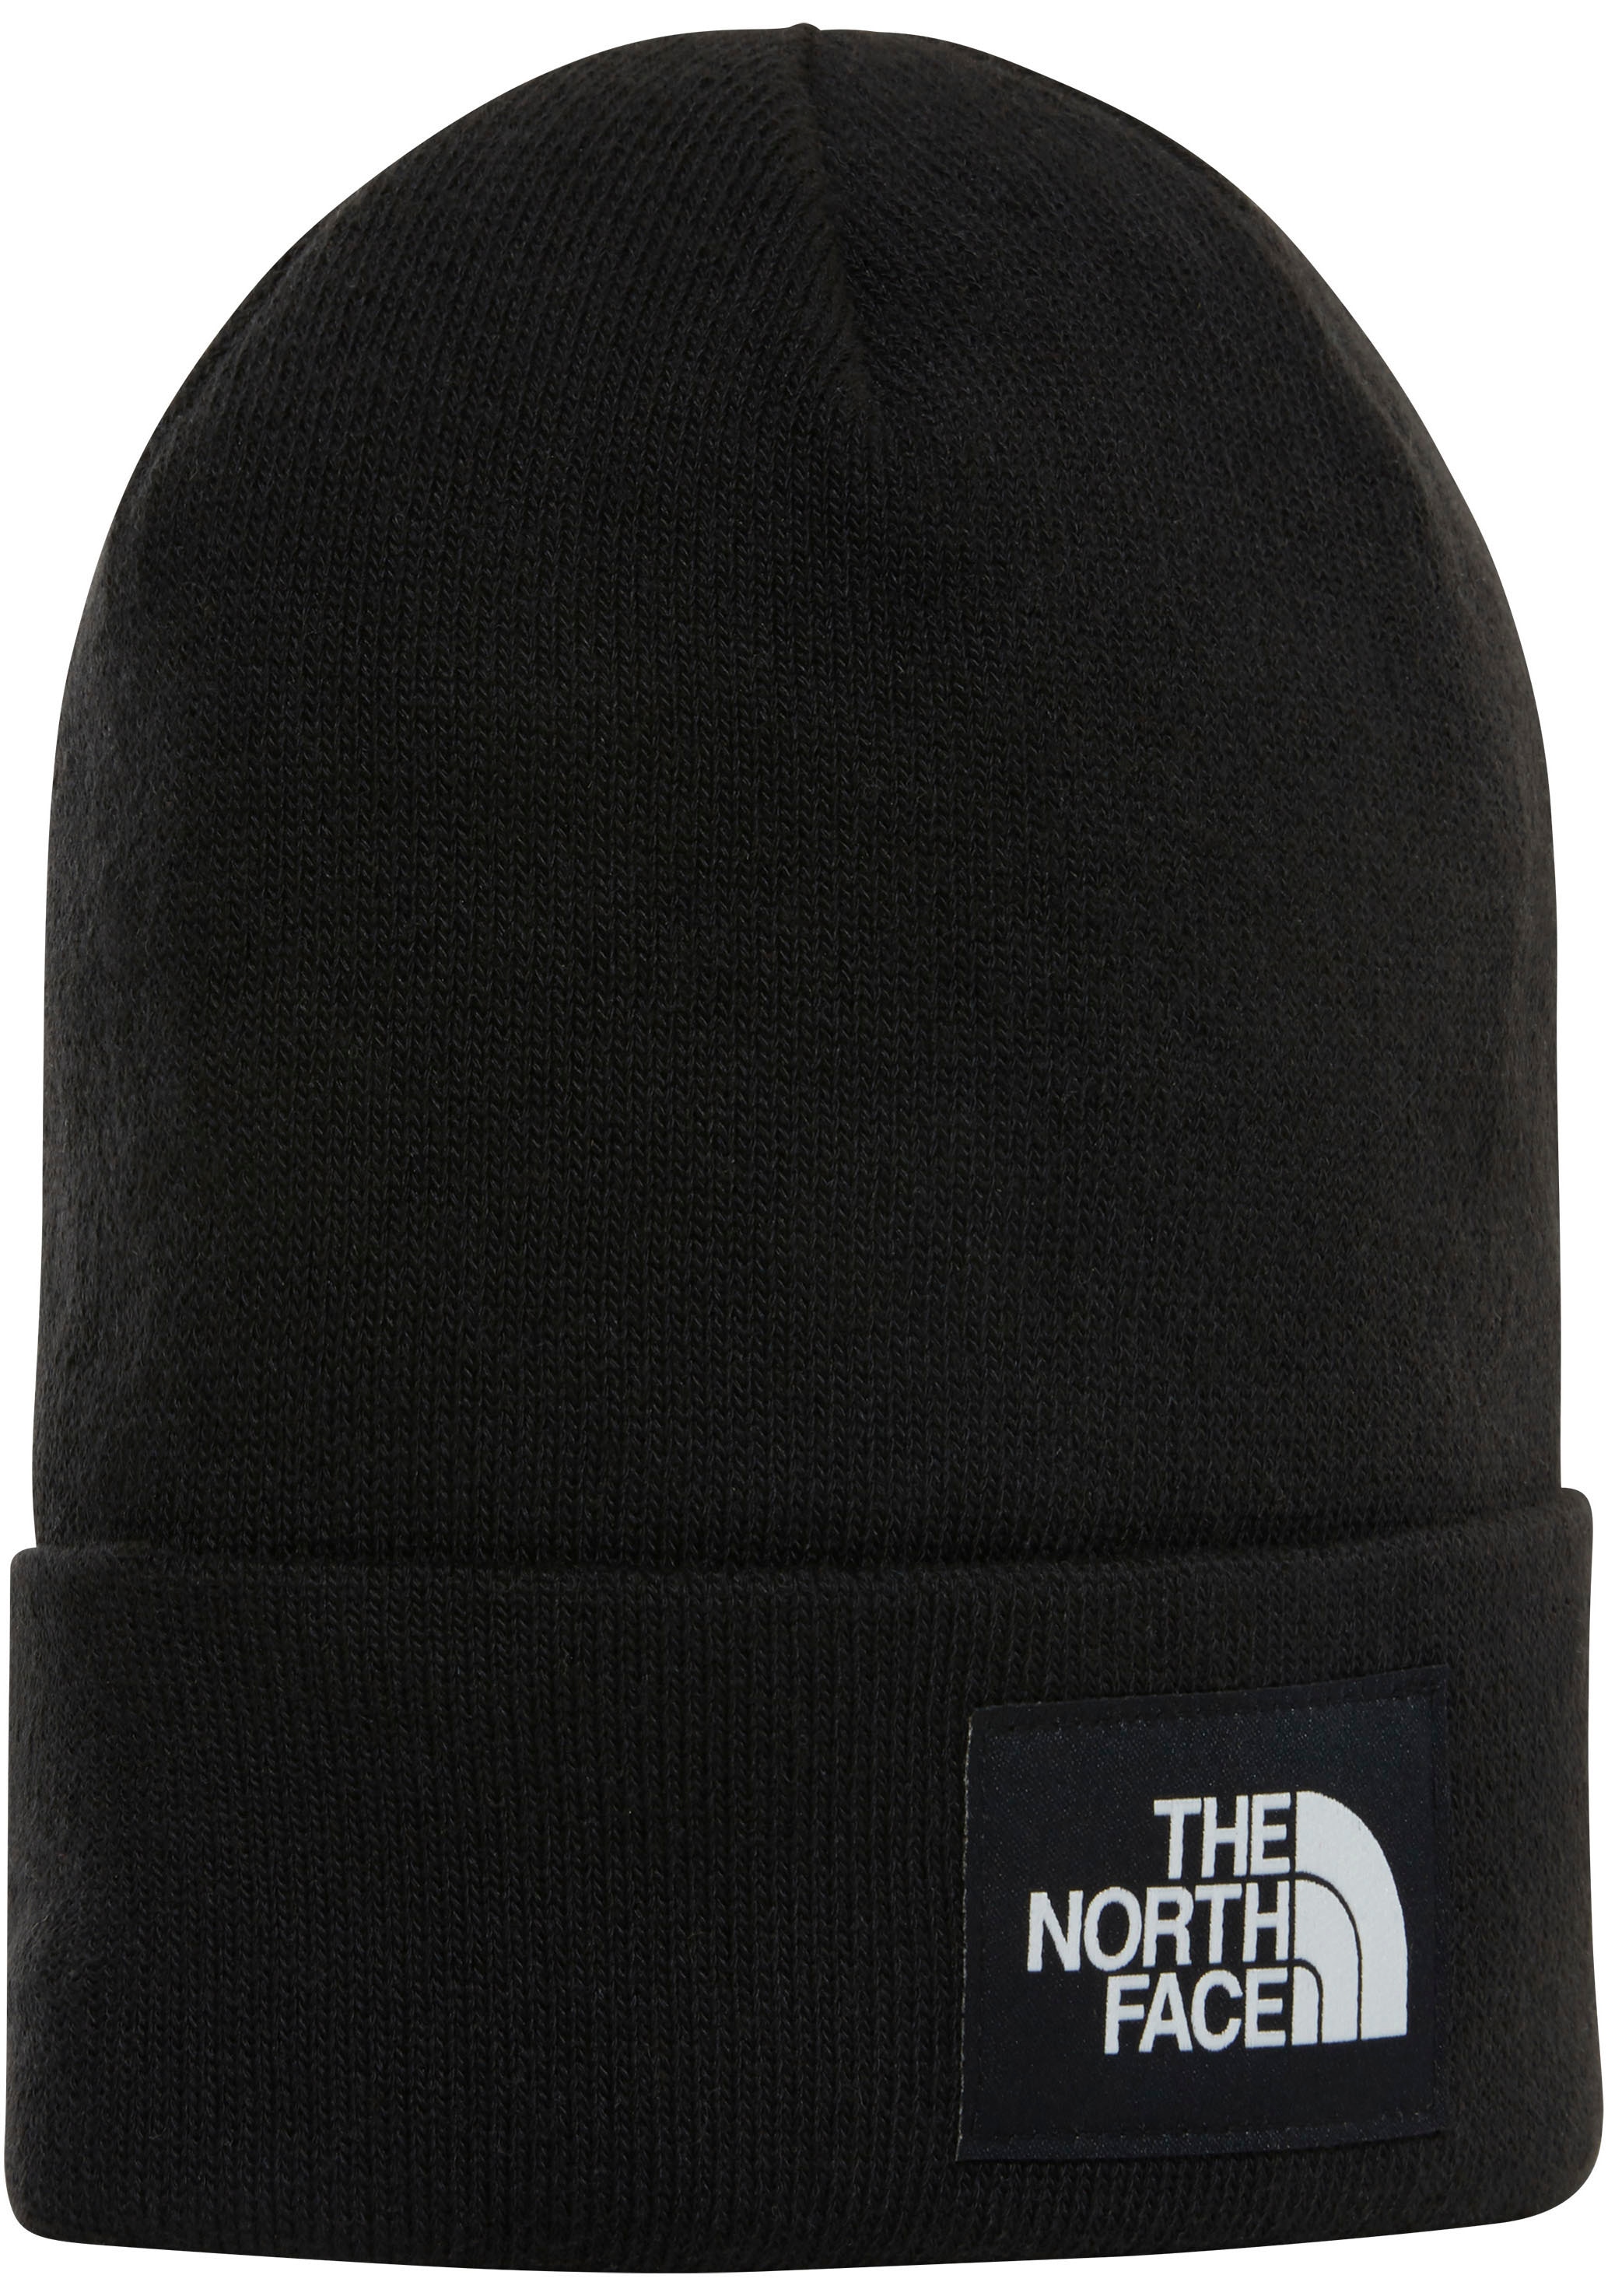 The North Face Beanie »DOCK WORKER RECYCLED BEANIE«, mit Logolabel